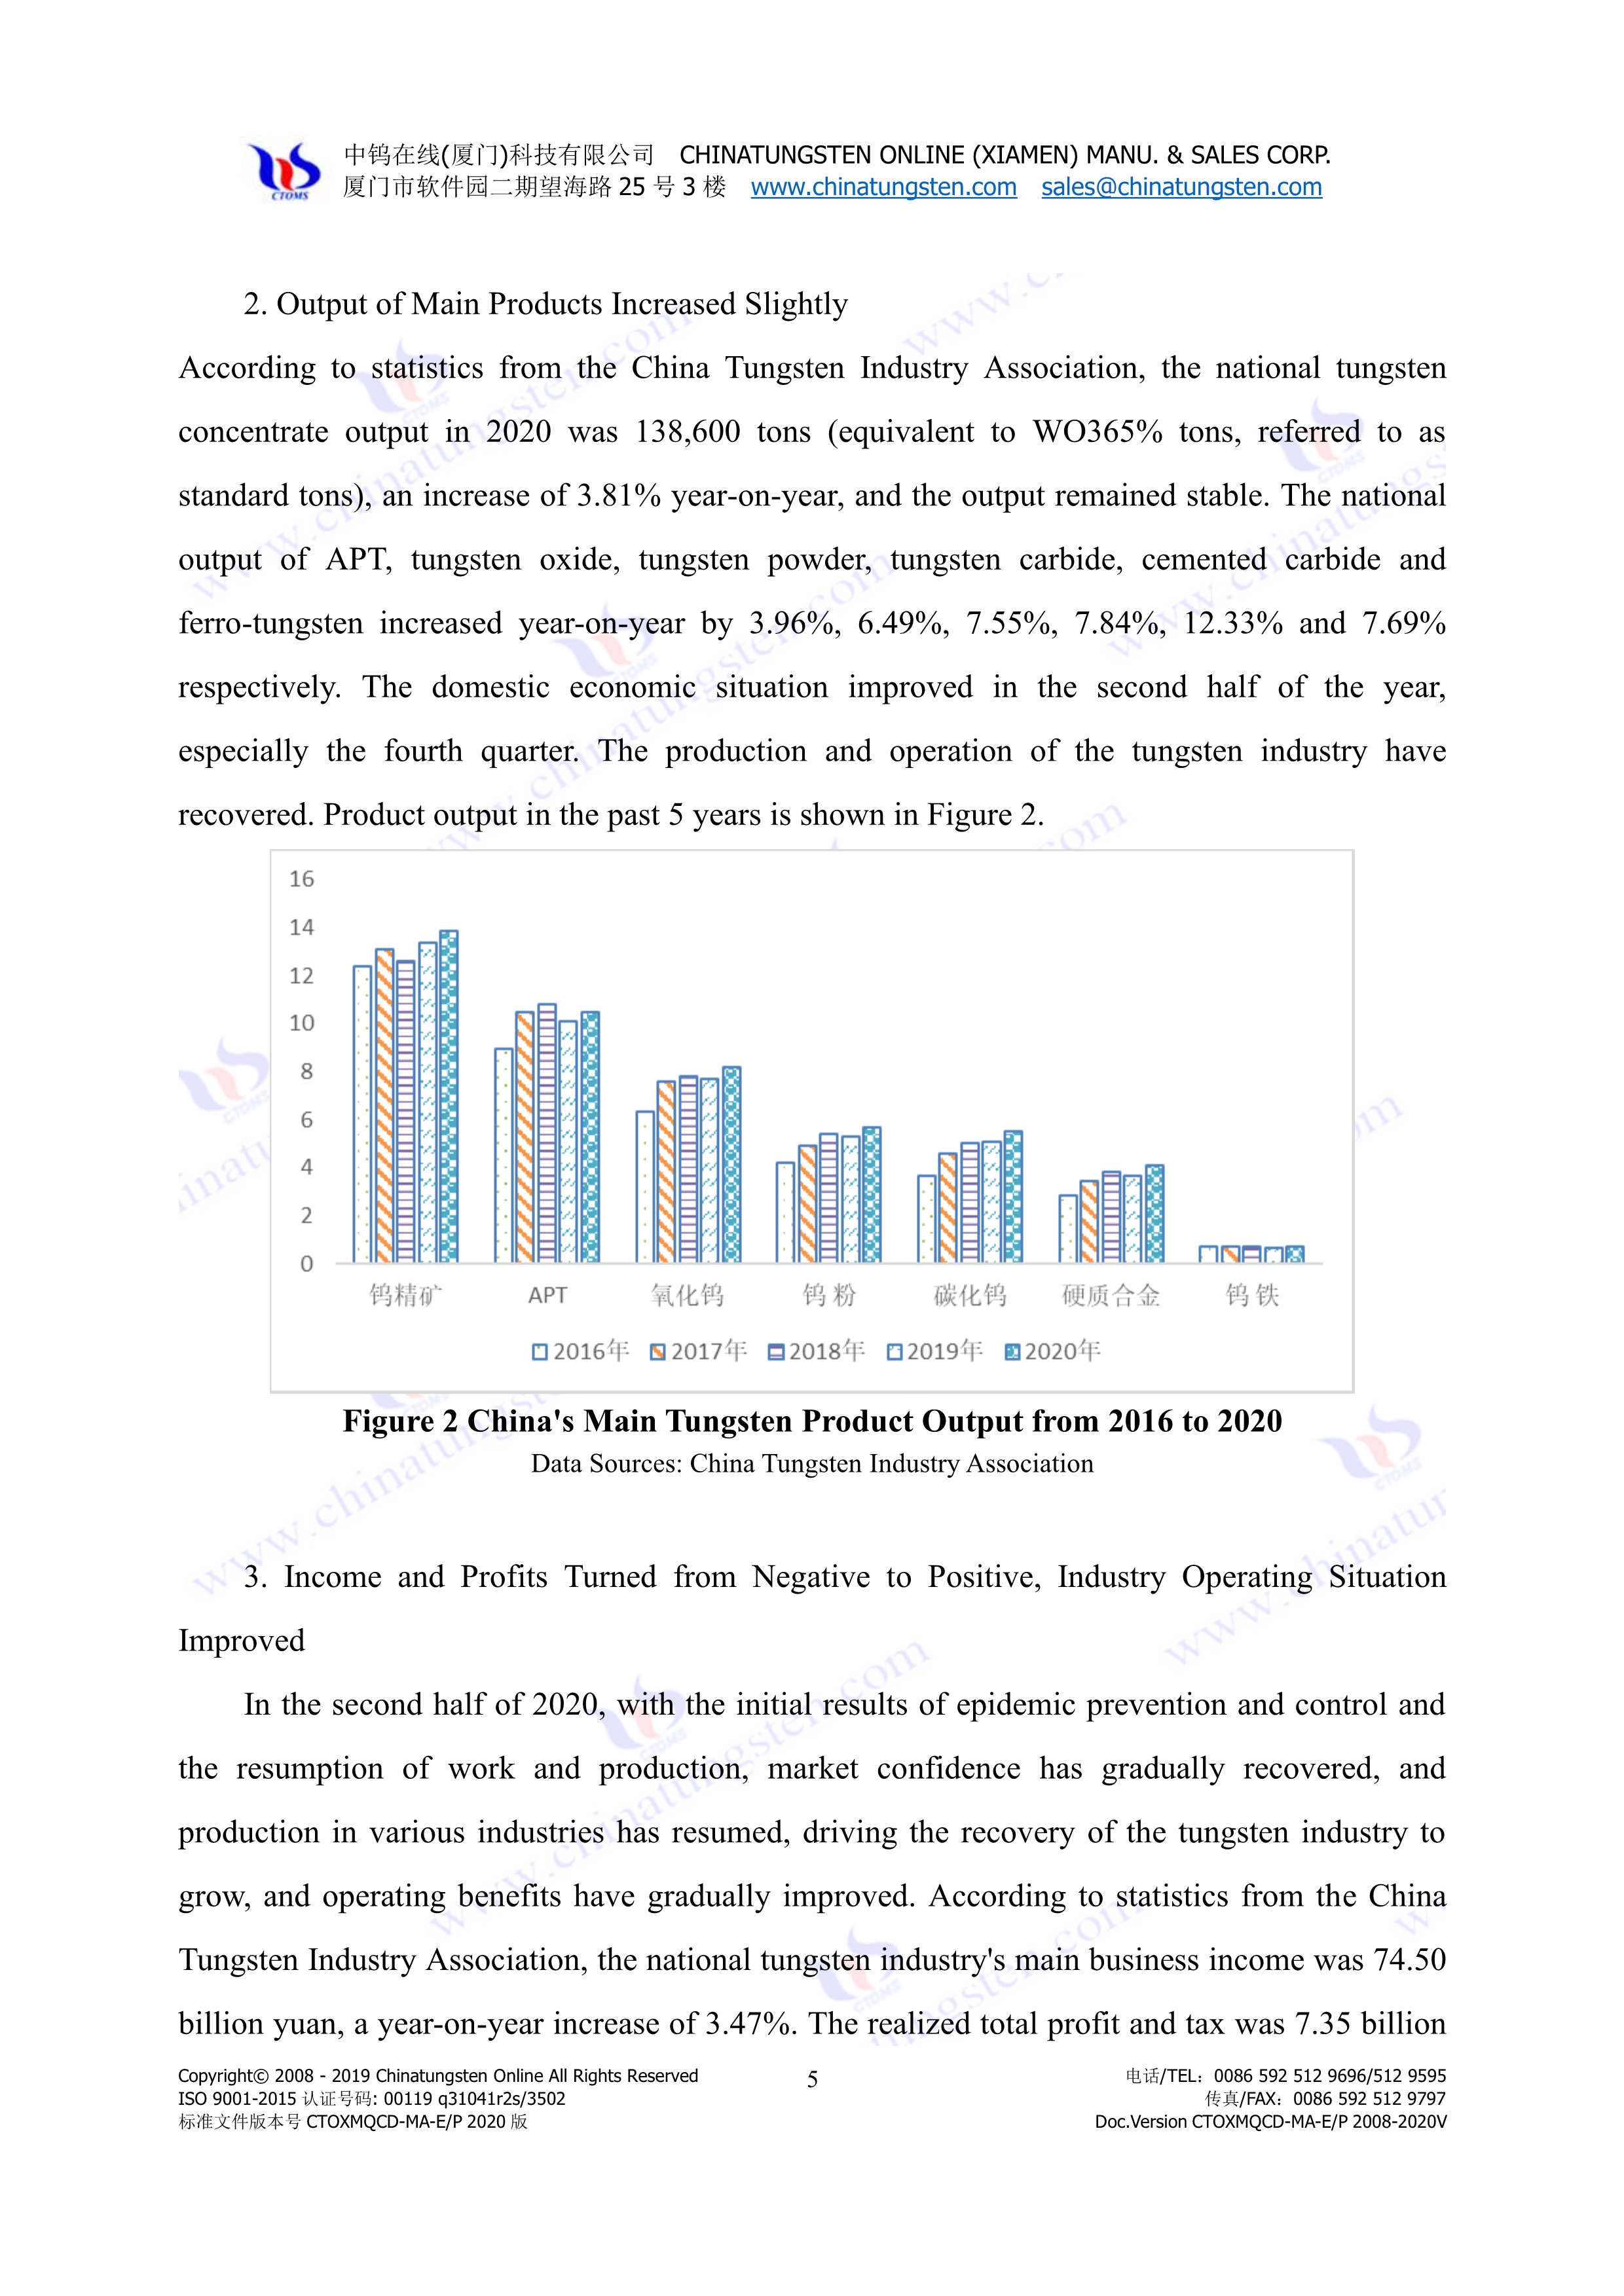 China tungsten industry economic overview in 2020 picture